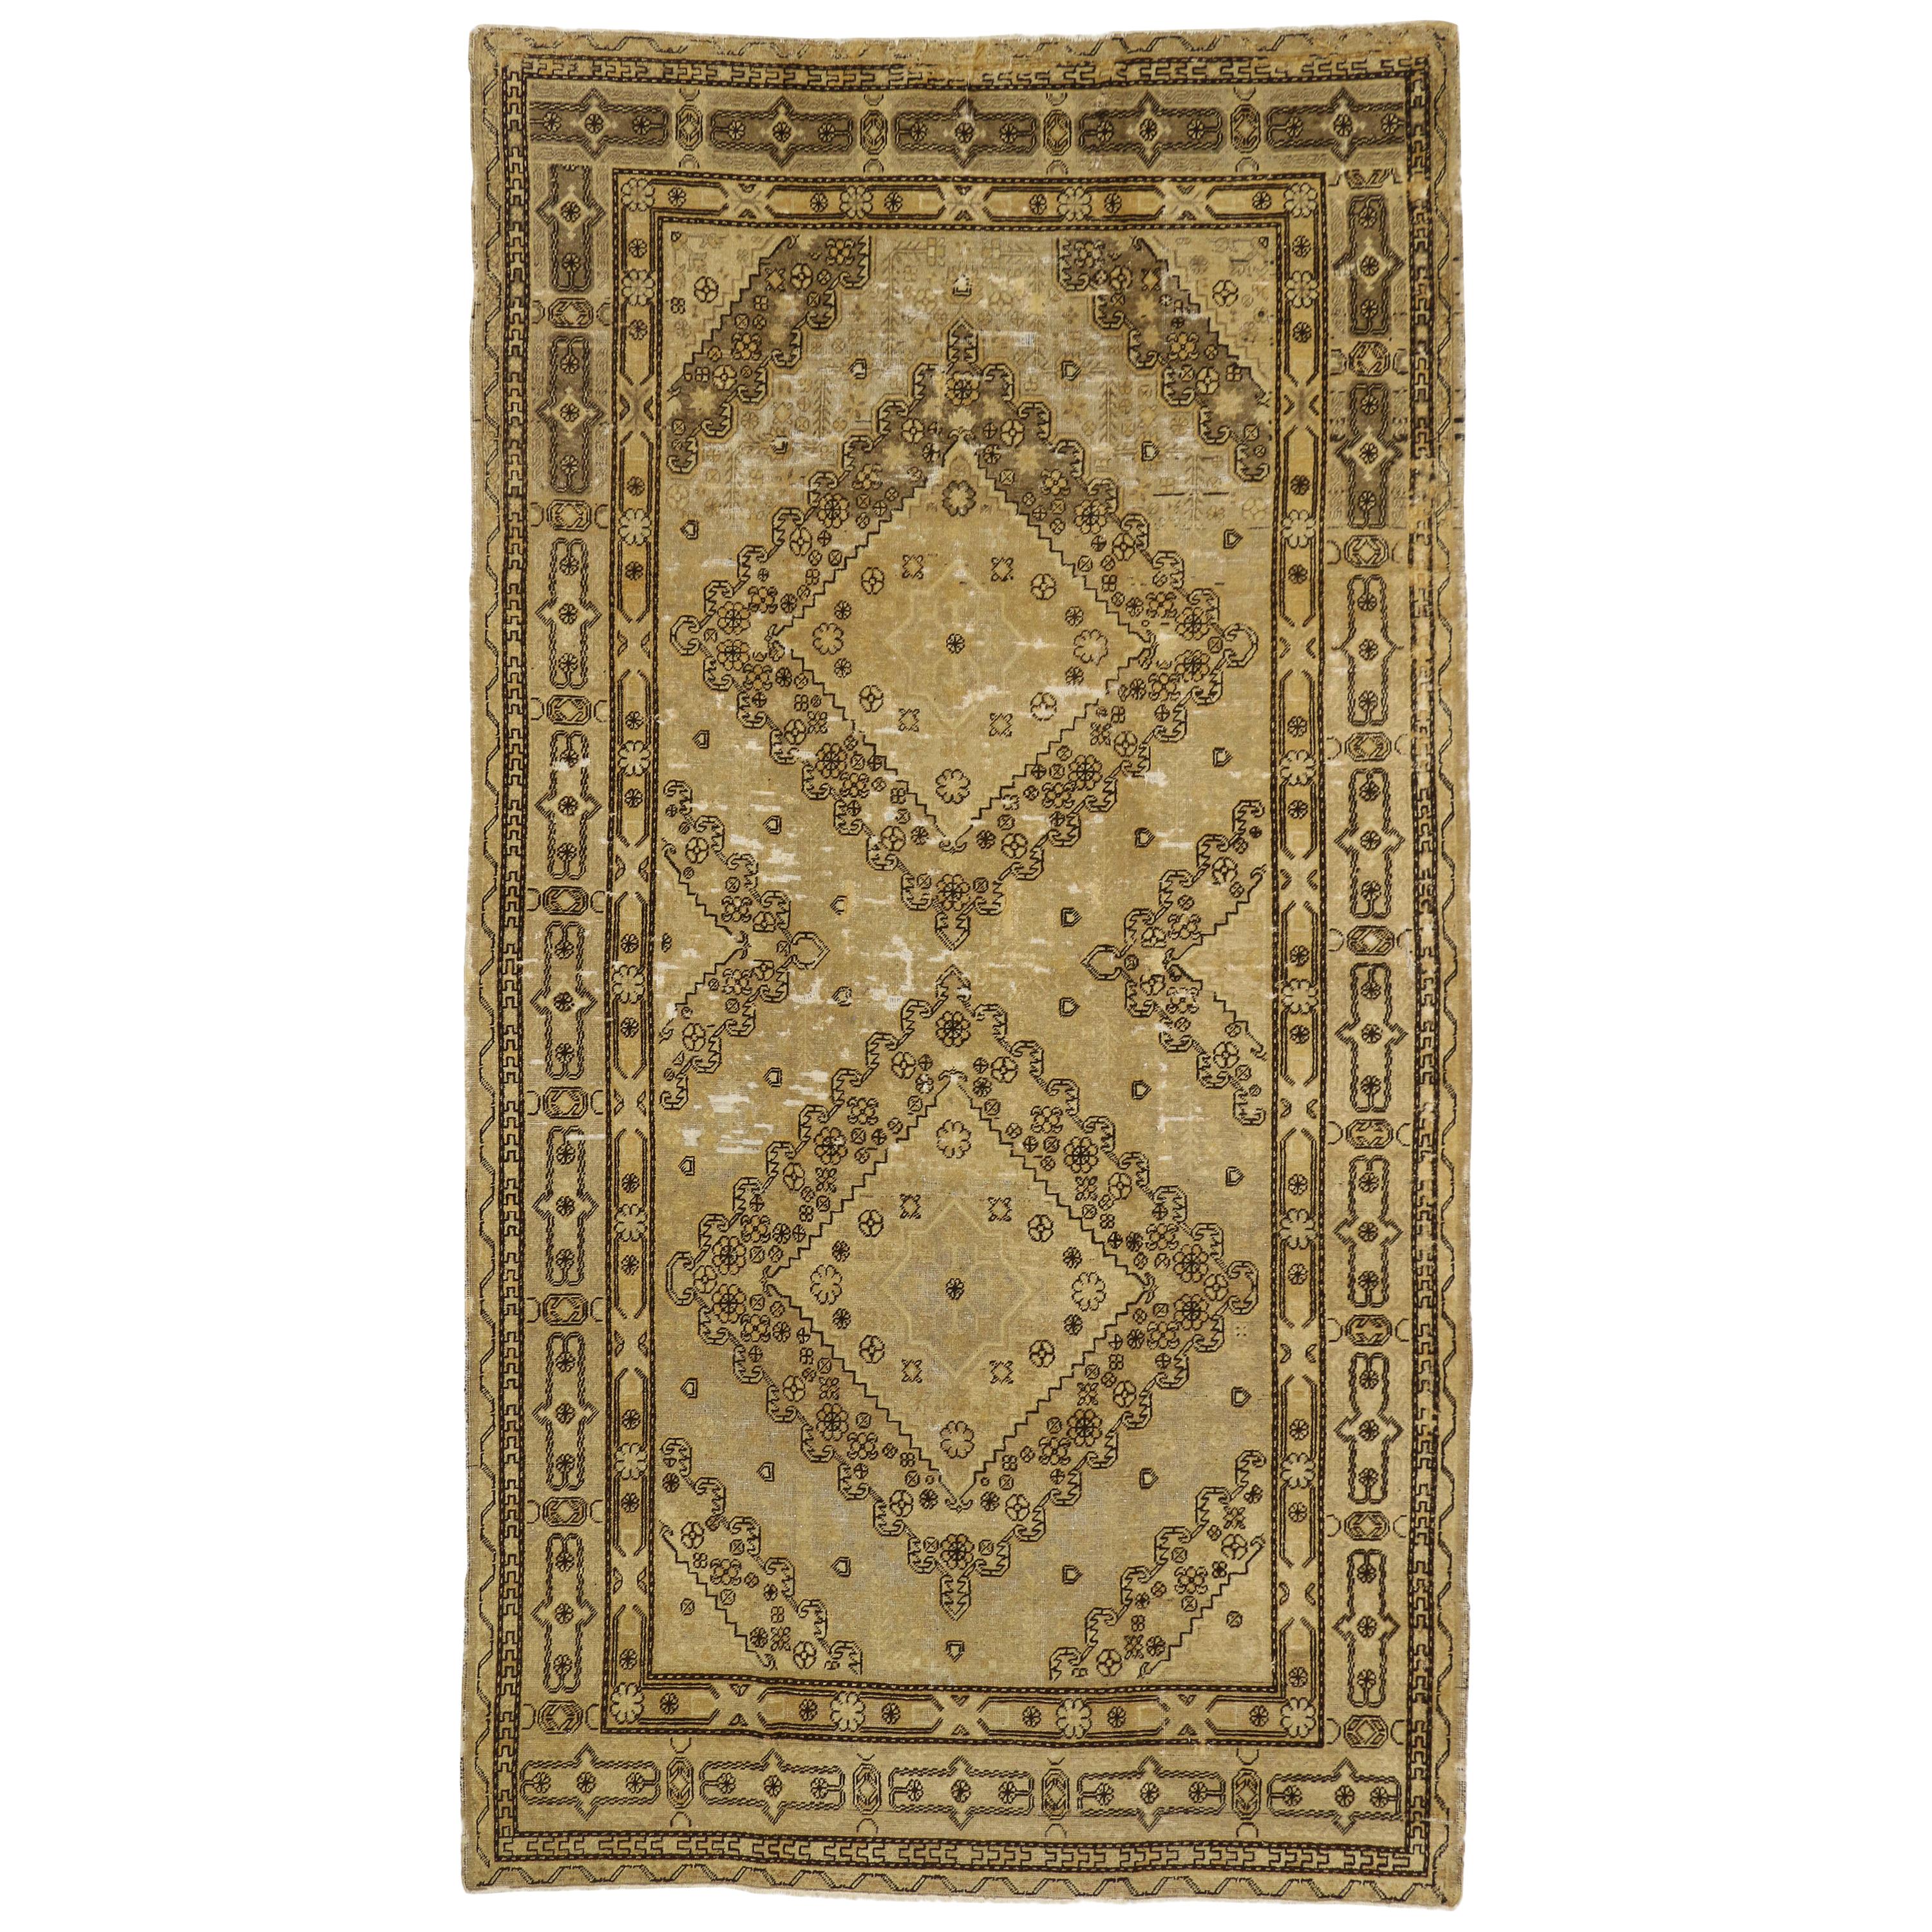 Distressed Antique Khotan Gallery Rug with Mid-Century Modern Style For Sale